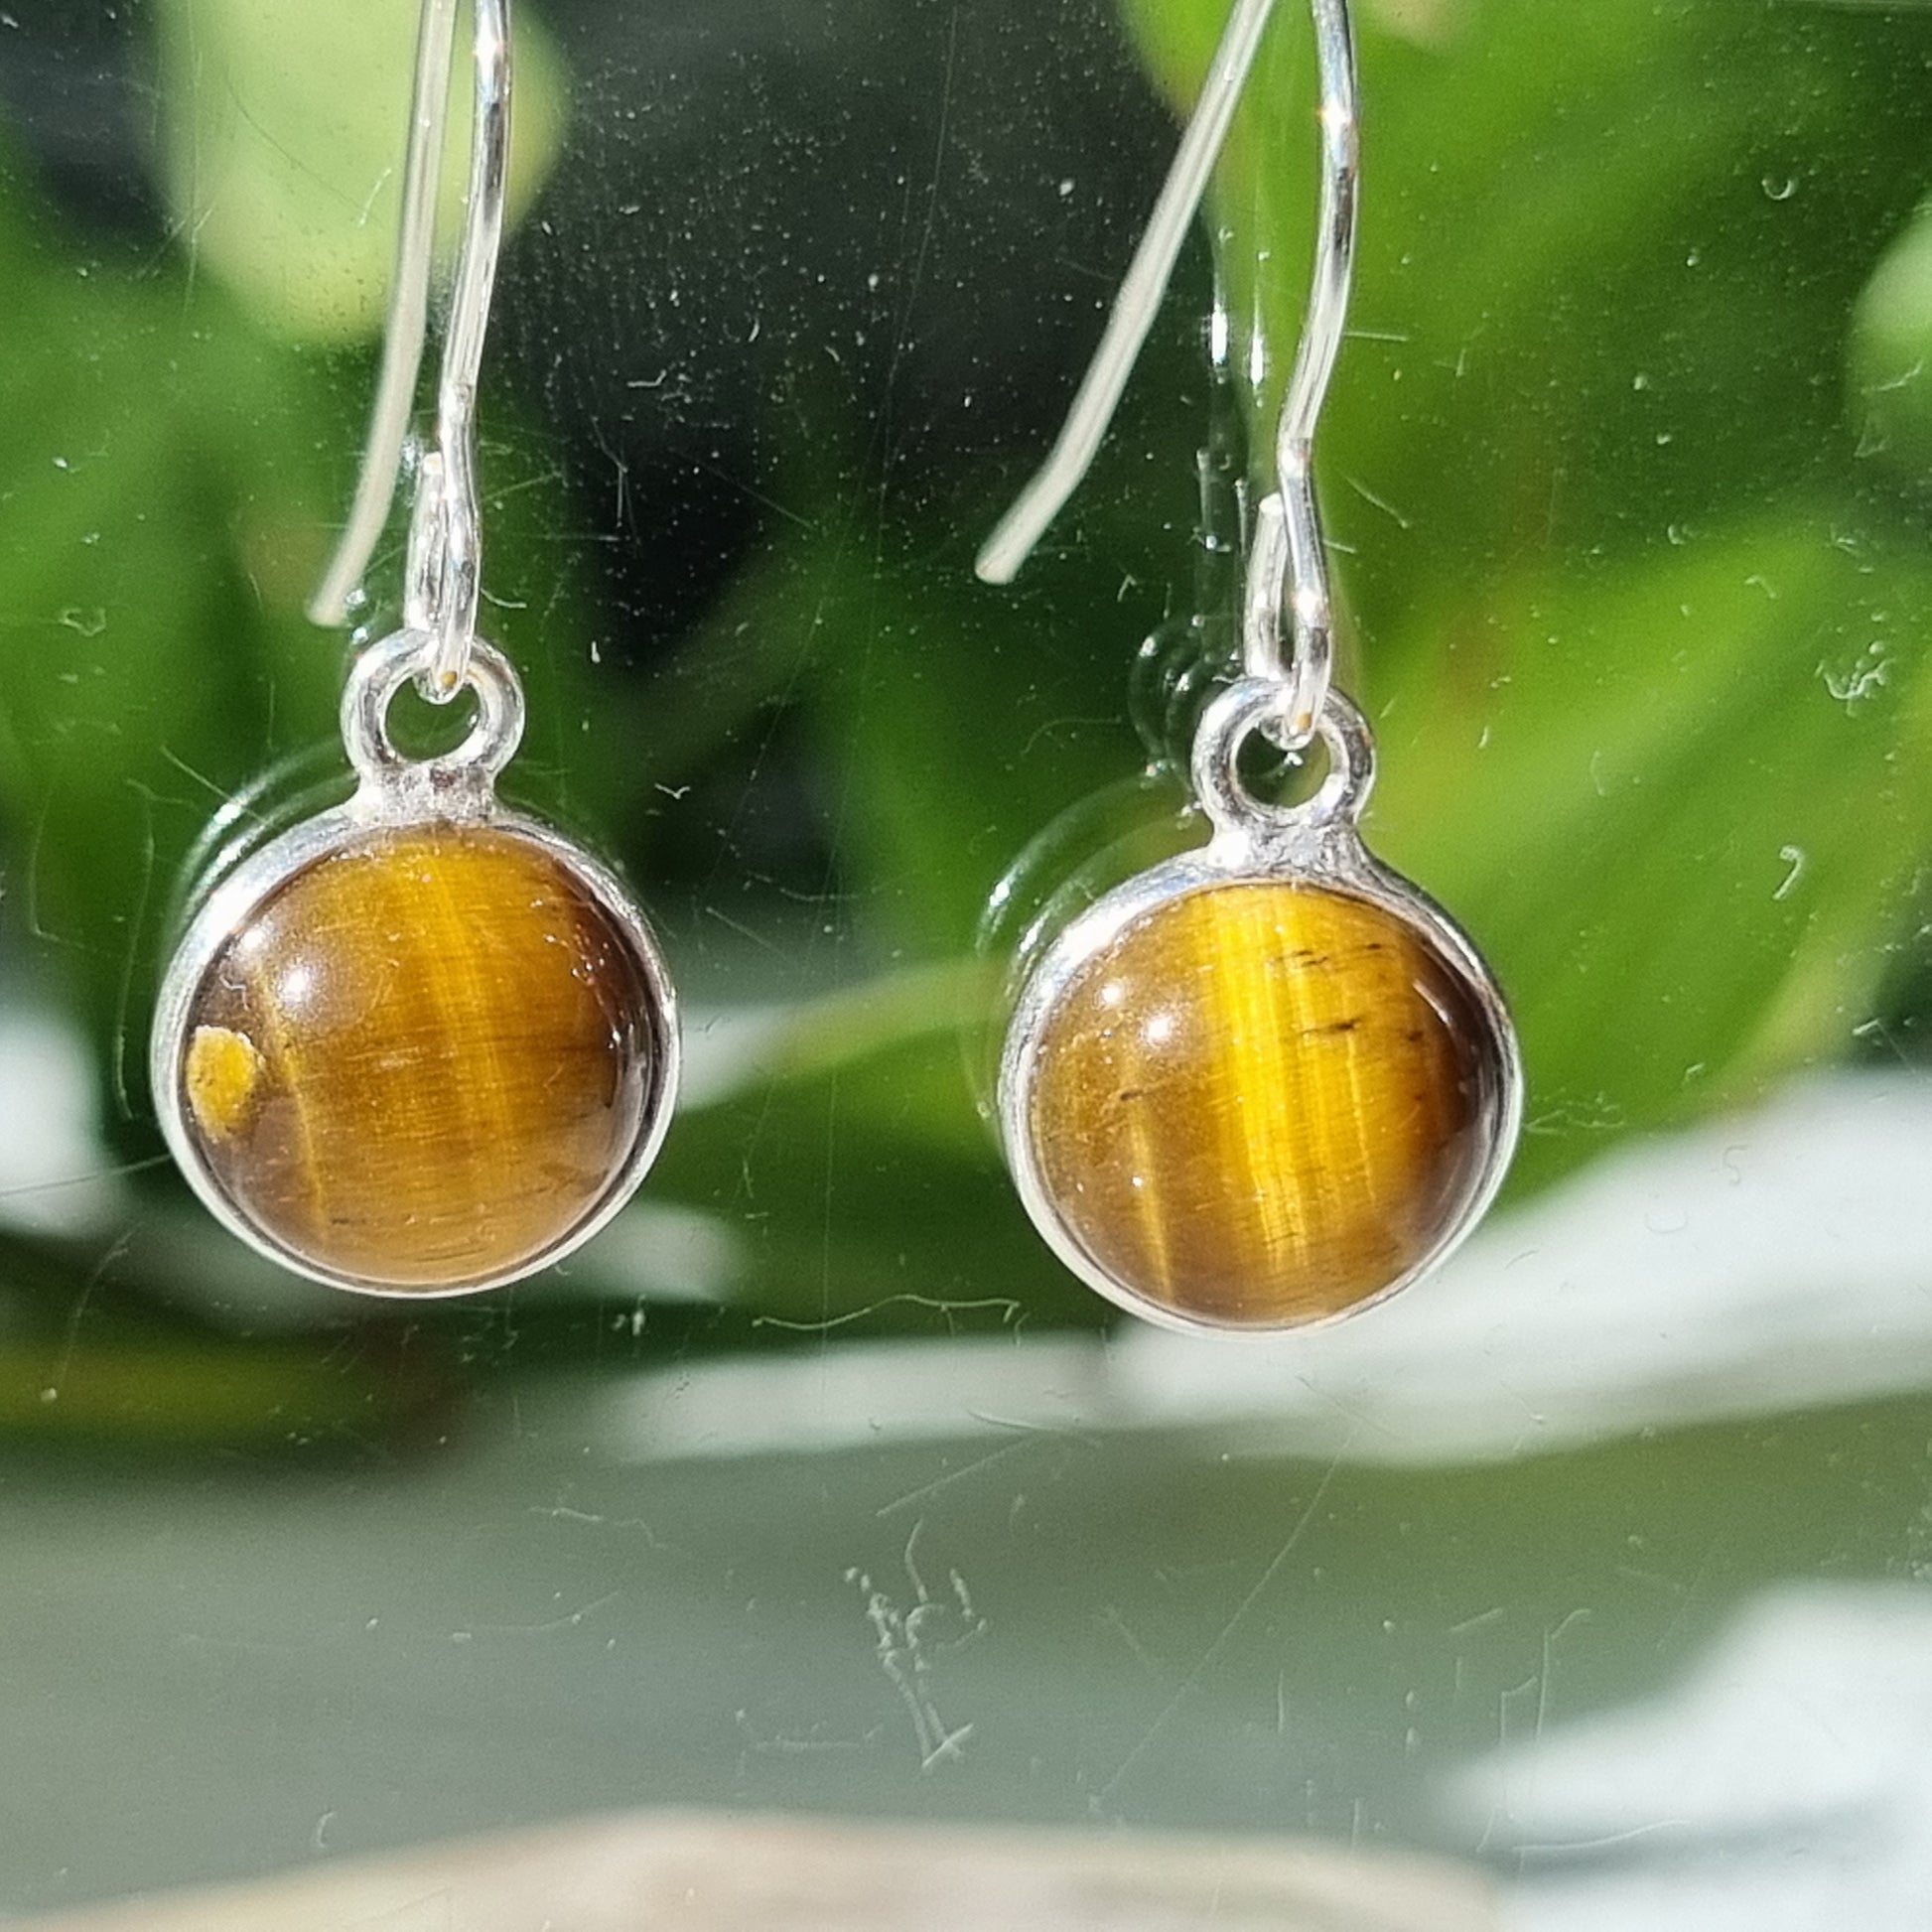 Tigers Eye sterling silver earrings - Sparrow and Fox